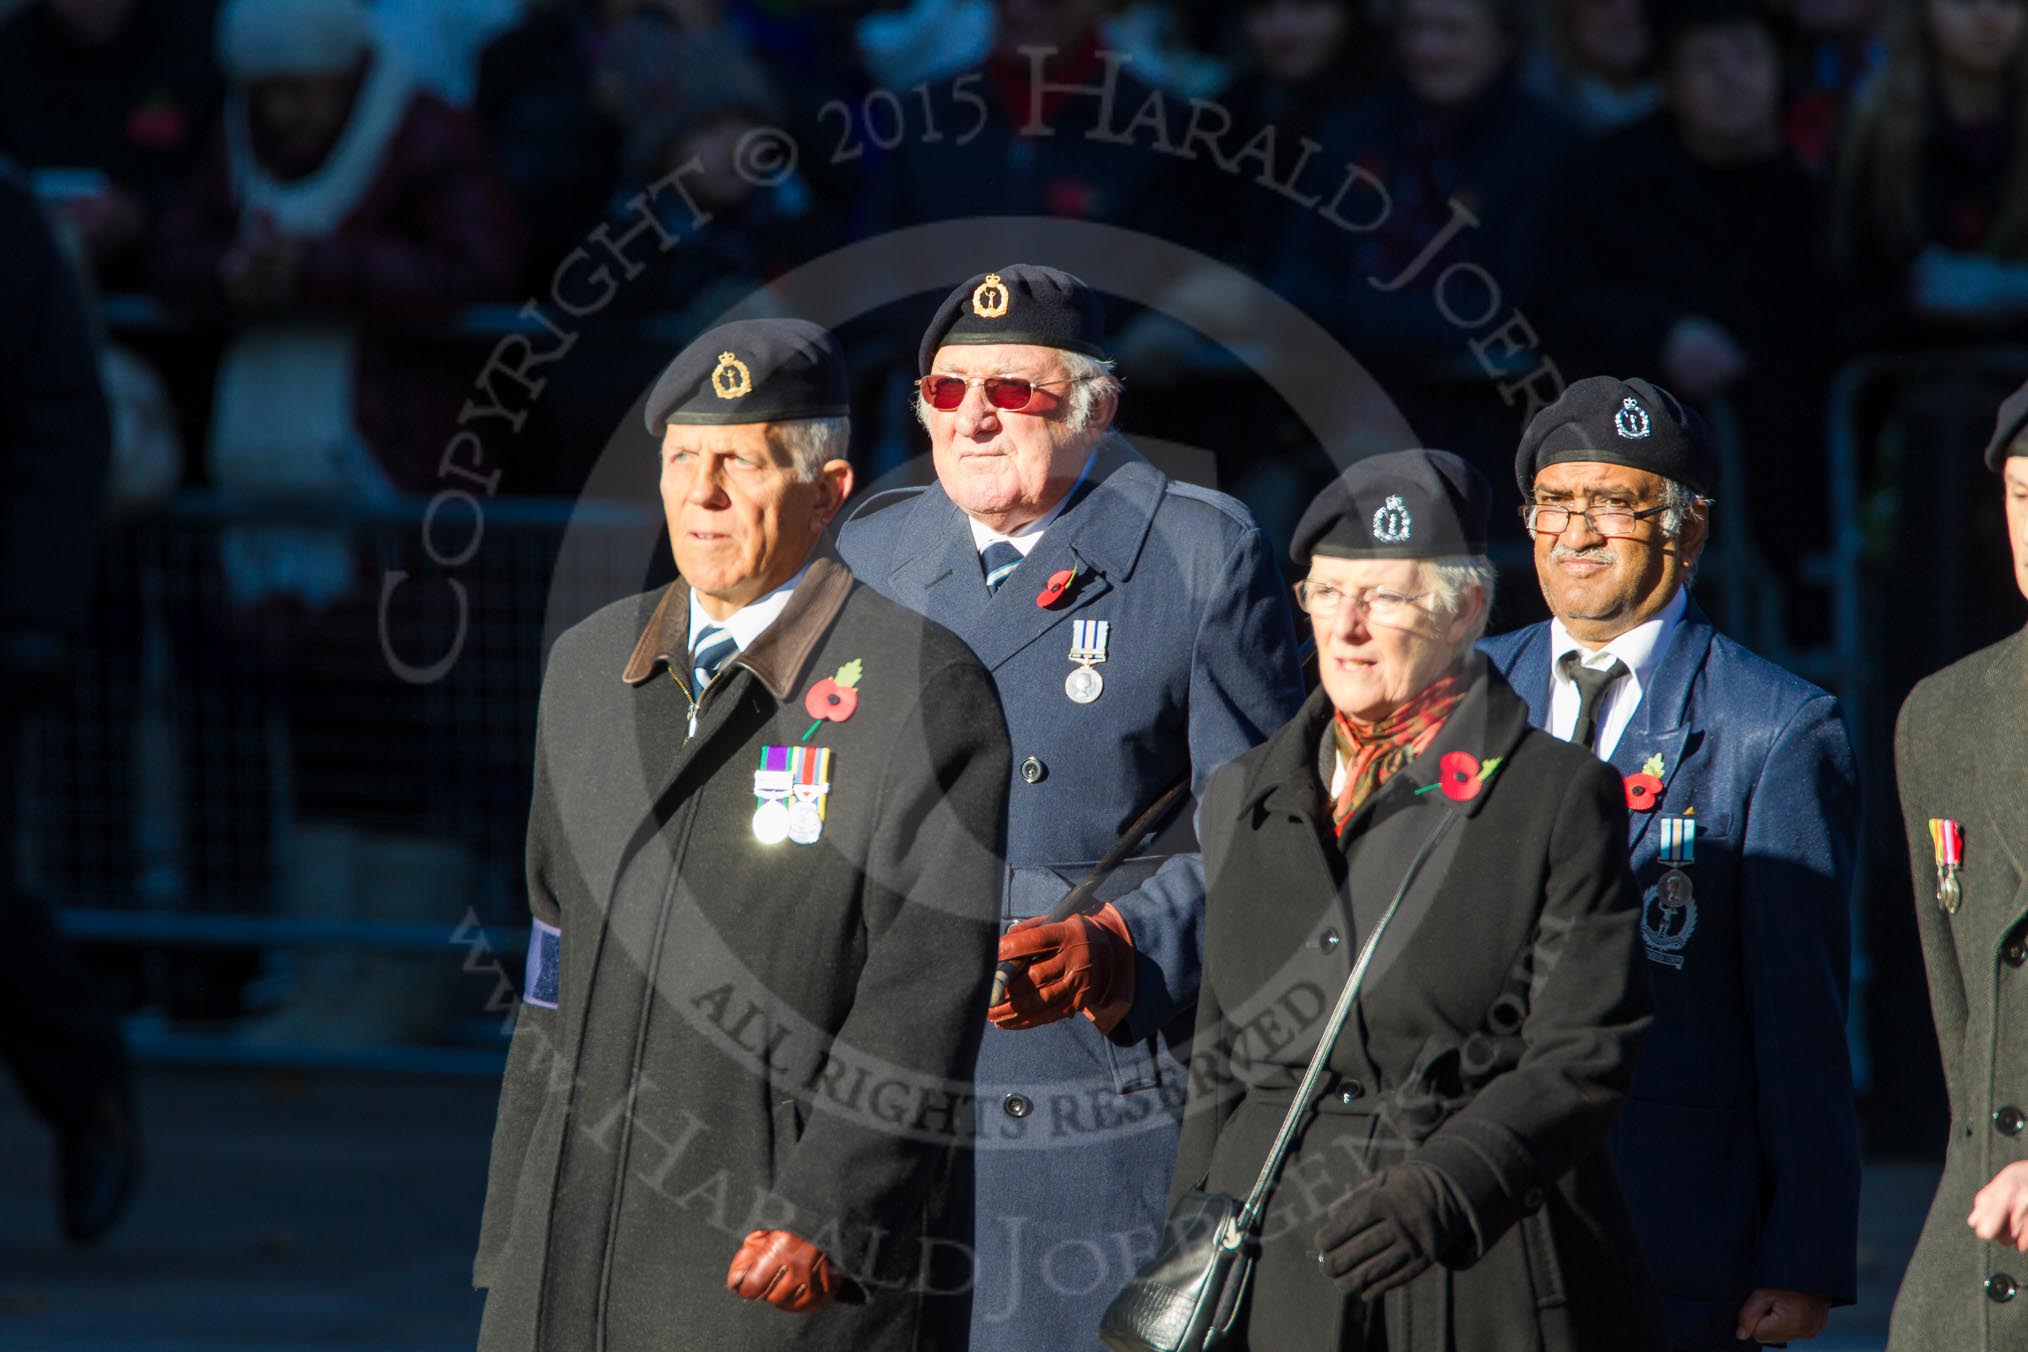 Remembrance Sunday Cenotaph March Past 2013: C9 - Royal Observer Corps Association..
Press stand opposite the Foreign Office building, Whitehall, London SW1,
London,
Greater London,
United Kingdom,
on 10 November 2013 at 12:07, image #1746